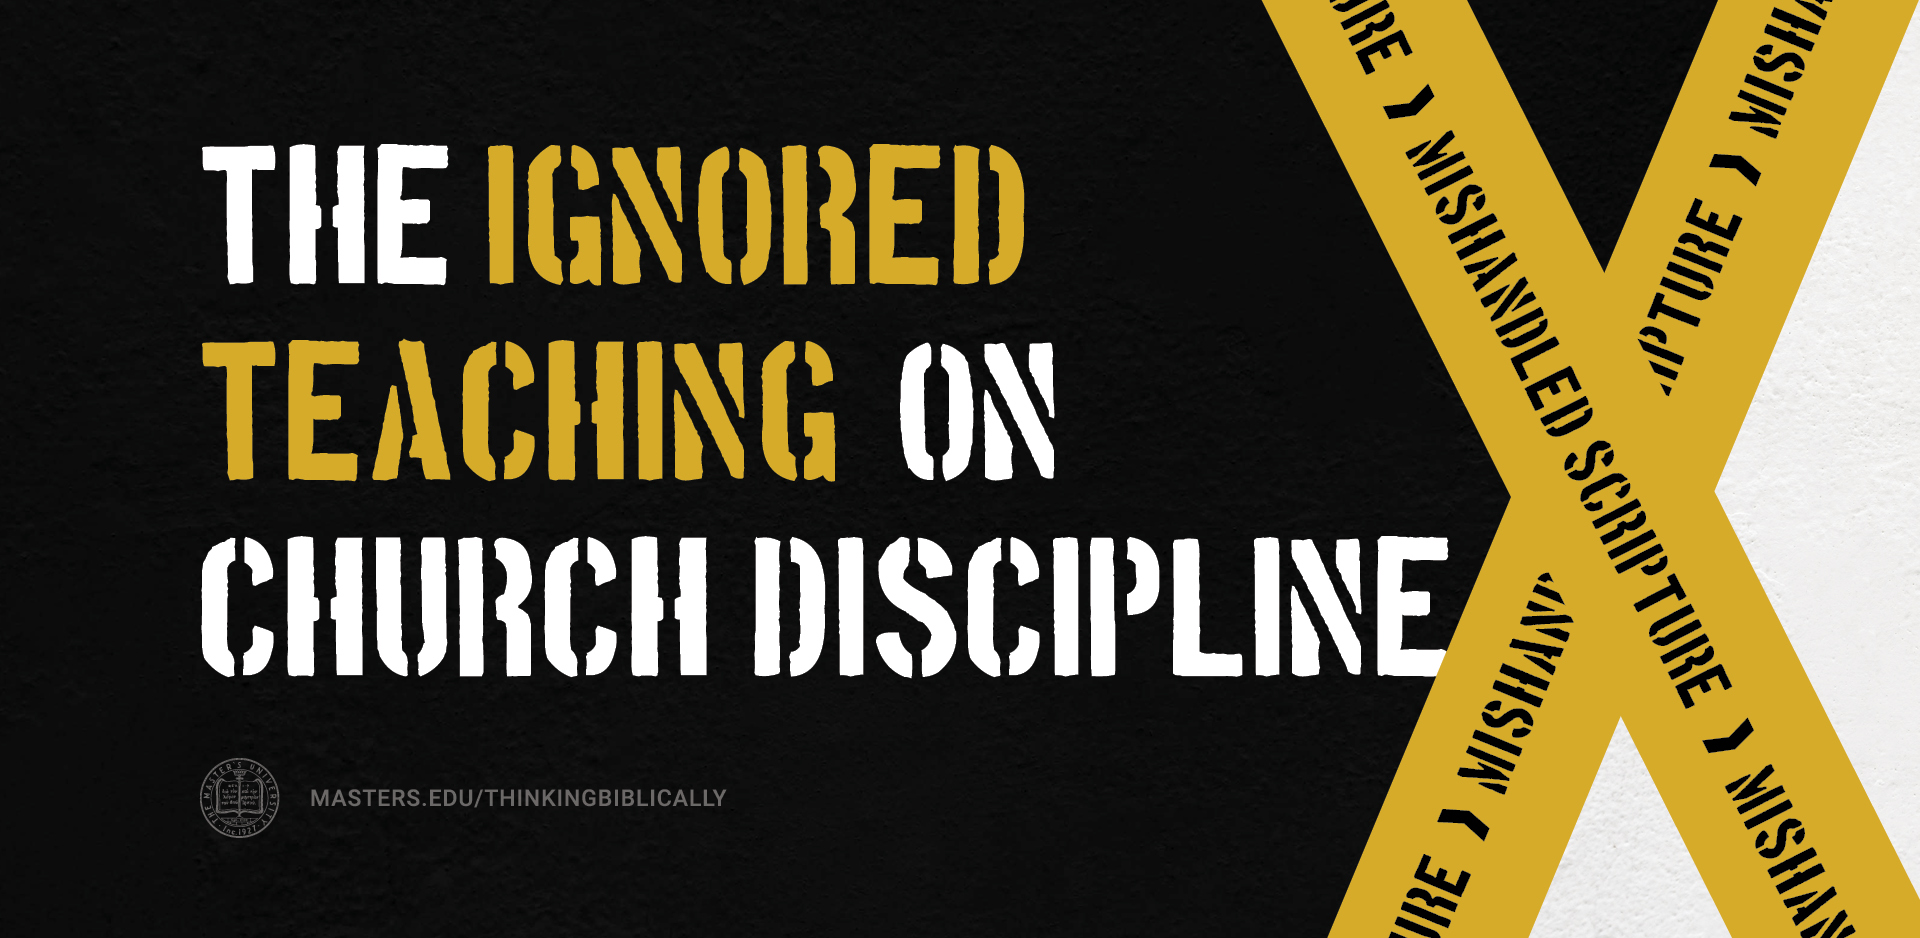 The Ignored Teaching on Church Discipline Featured Image